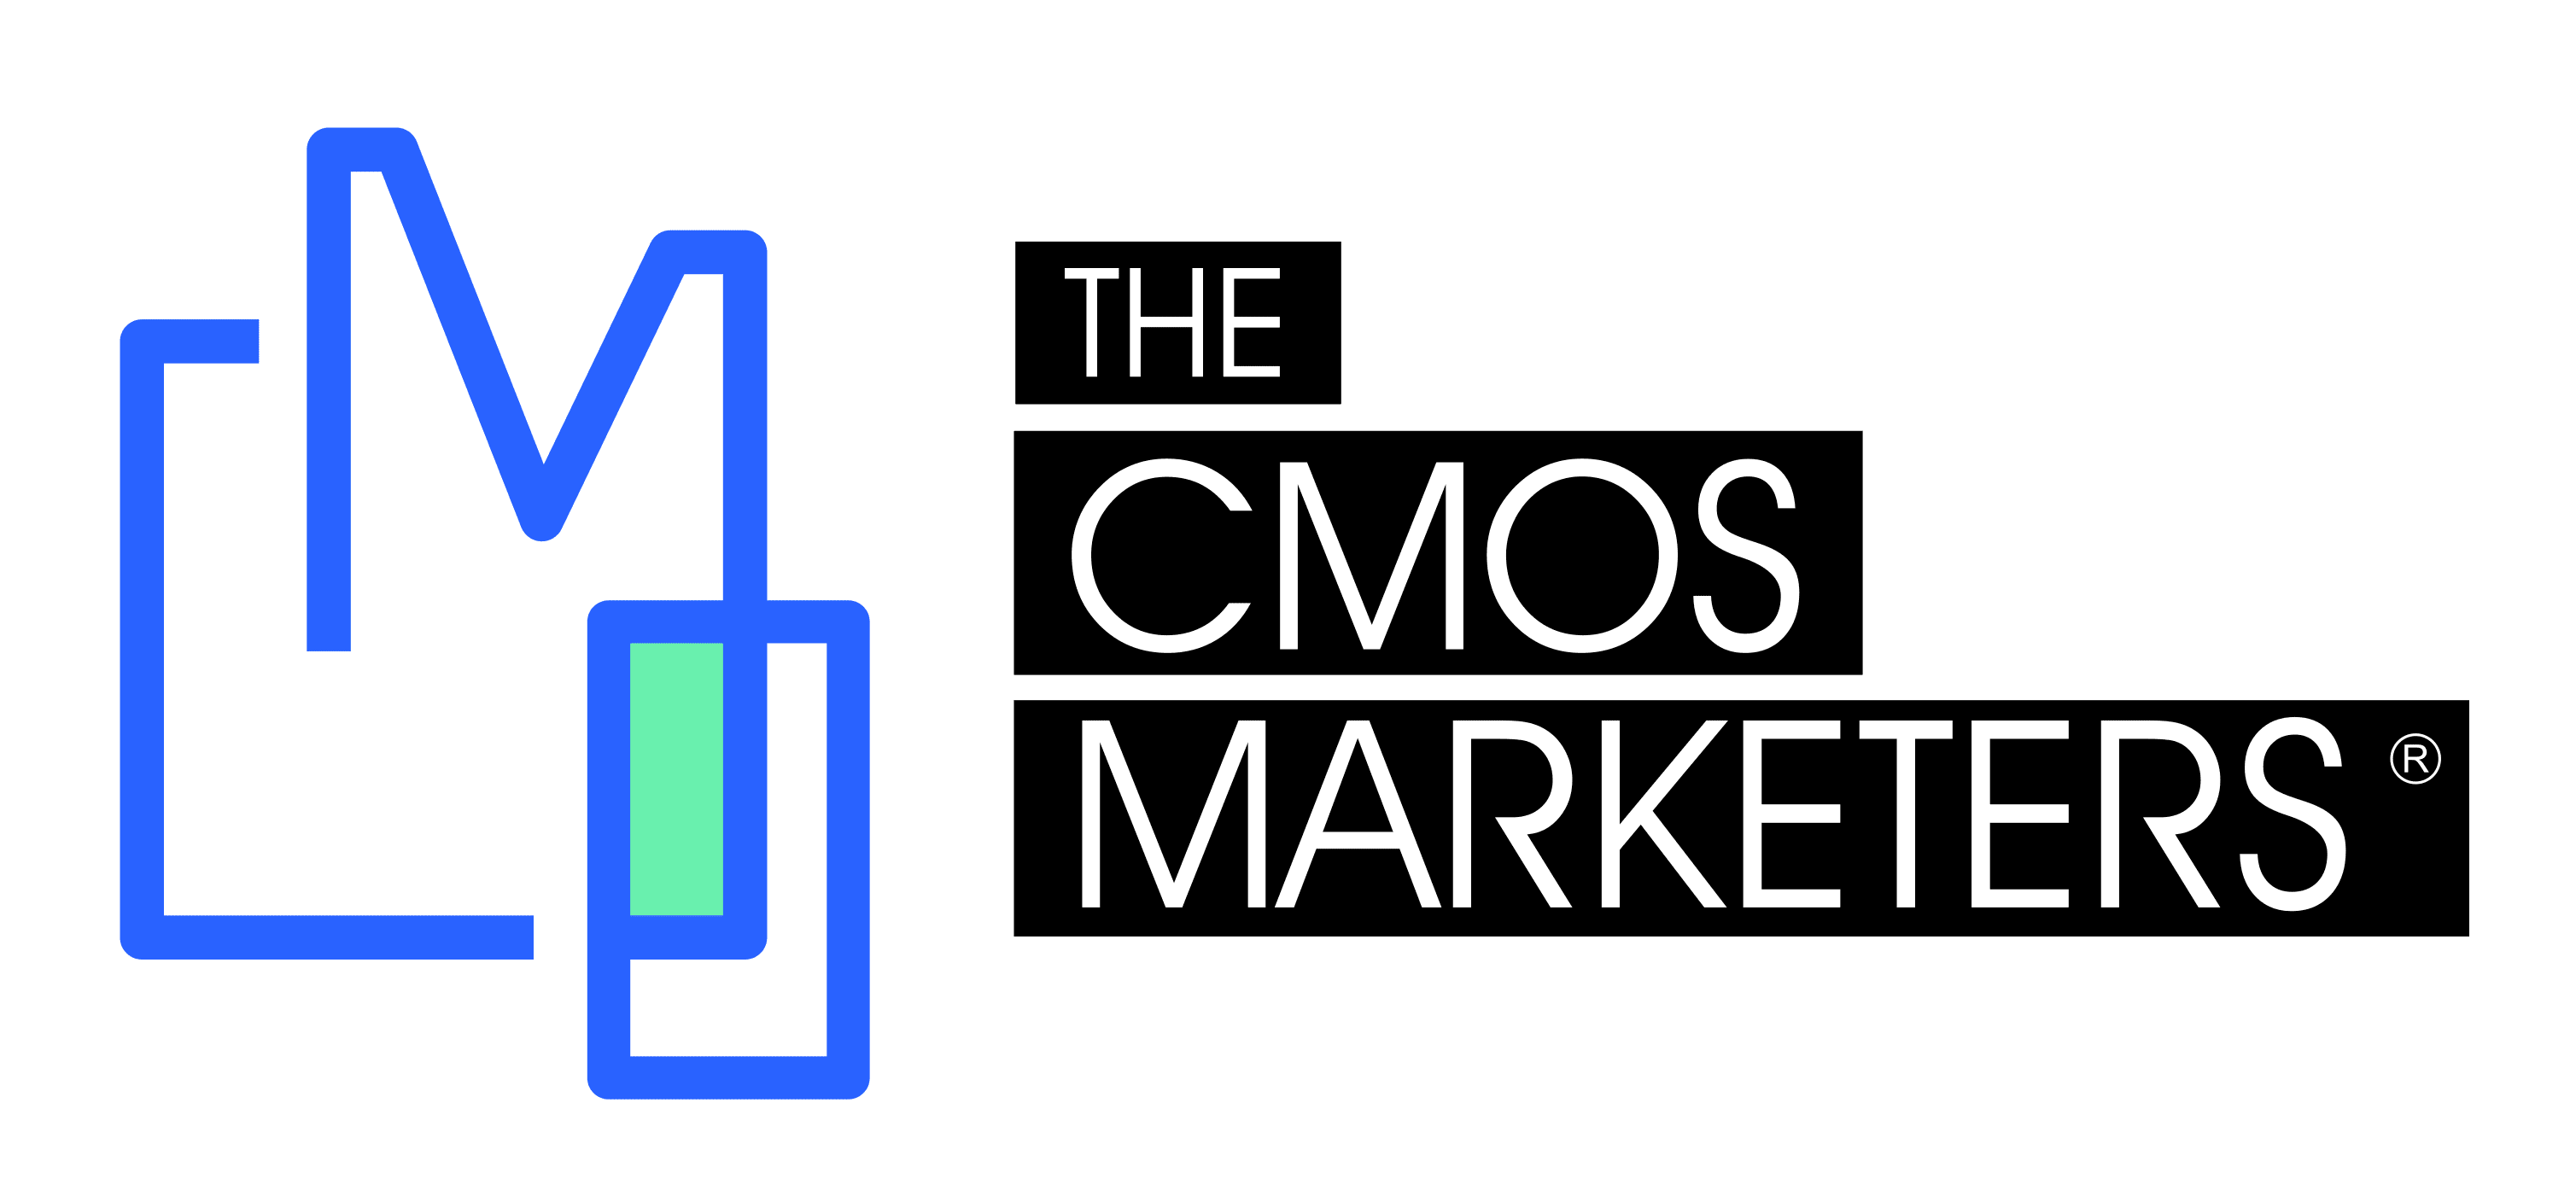 The CMOs Marketers